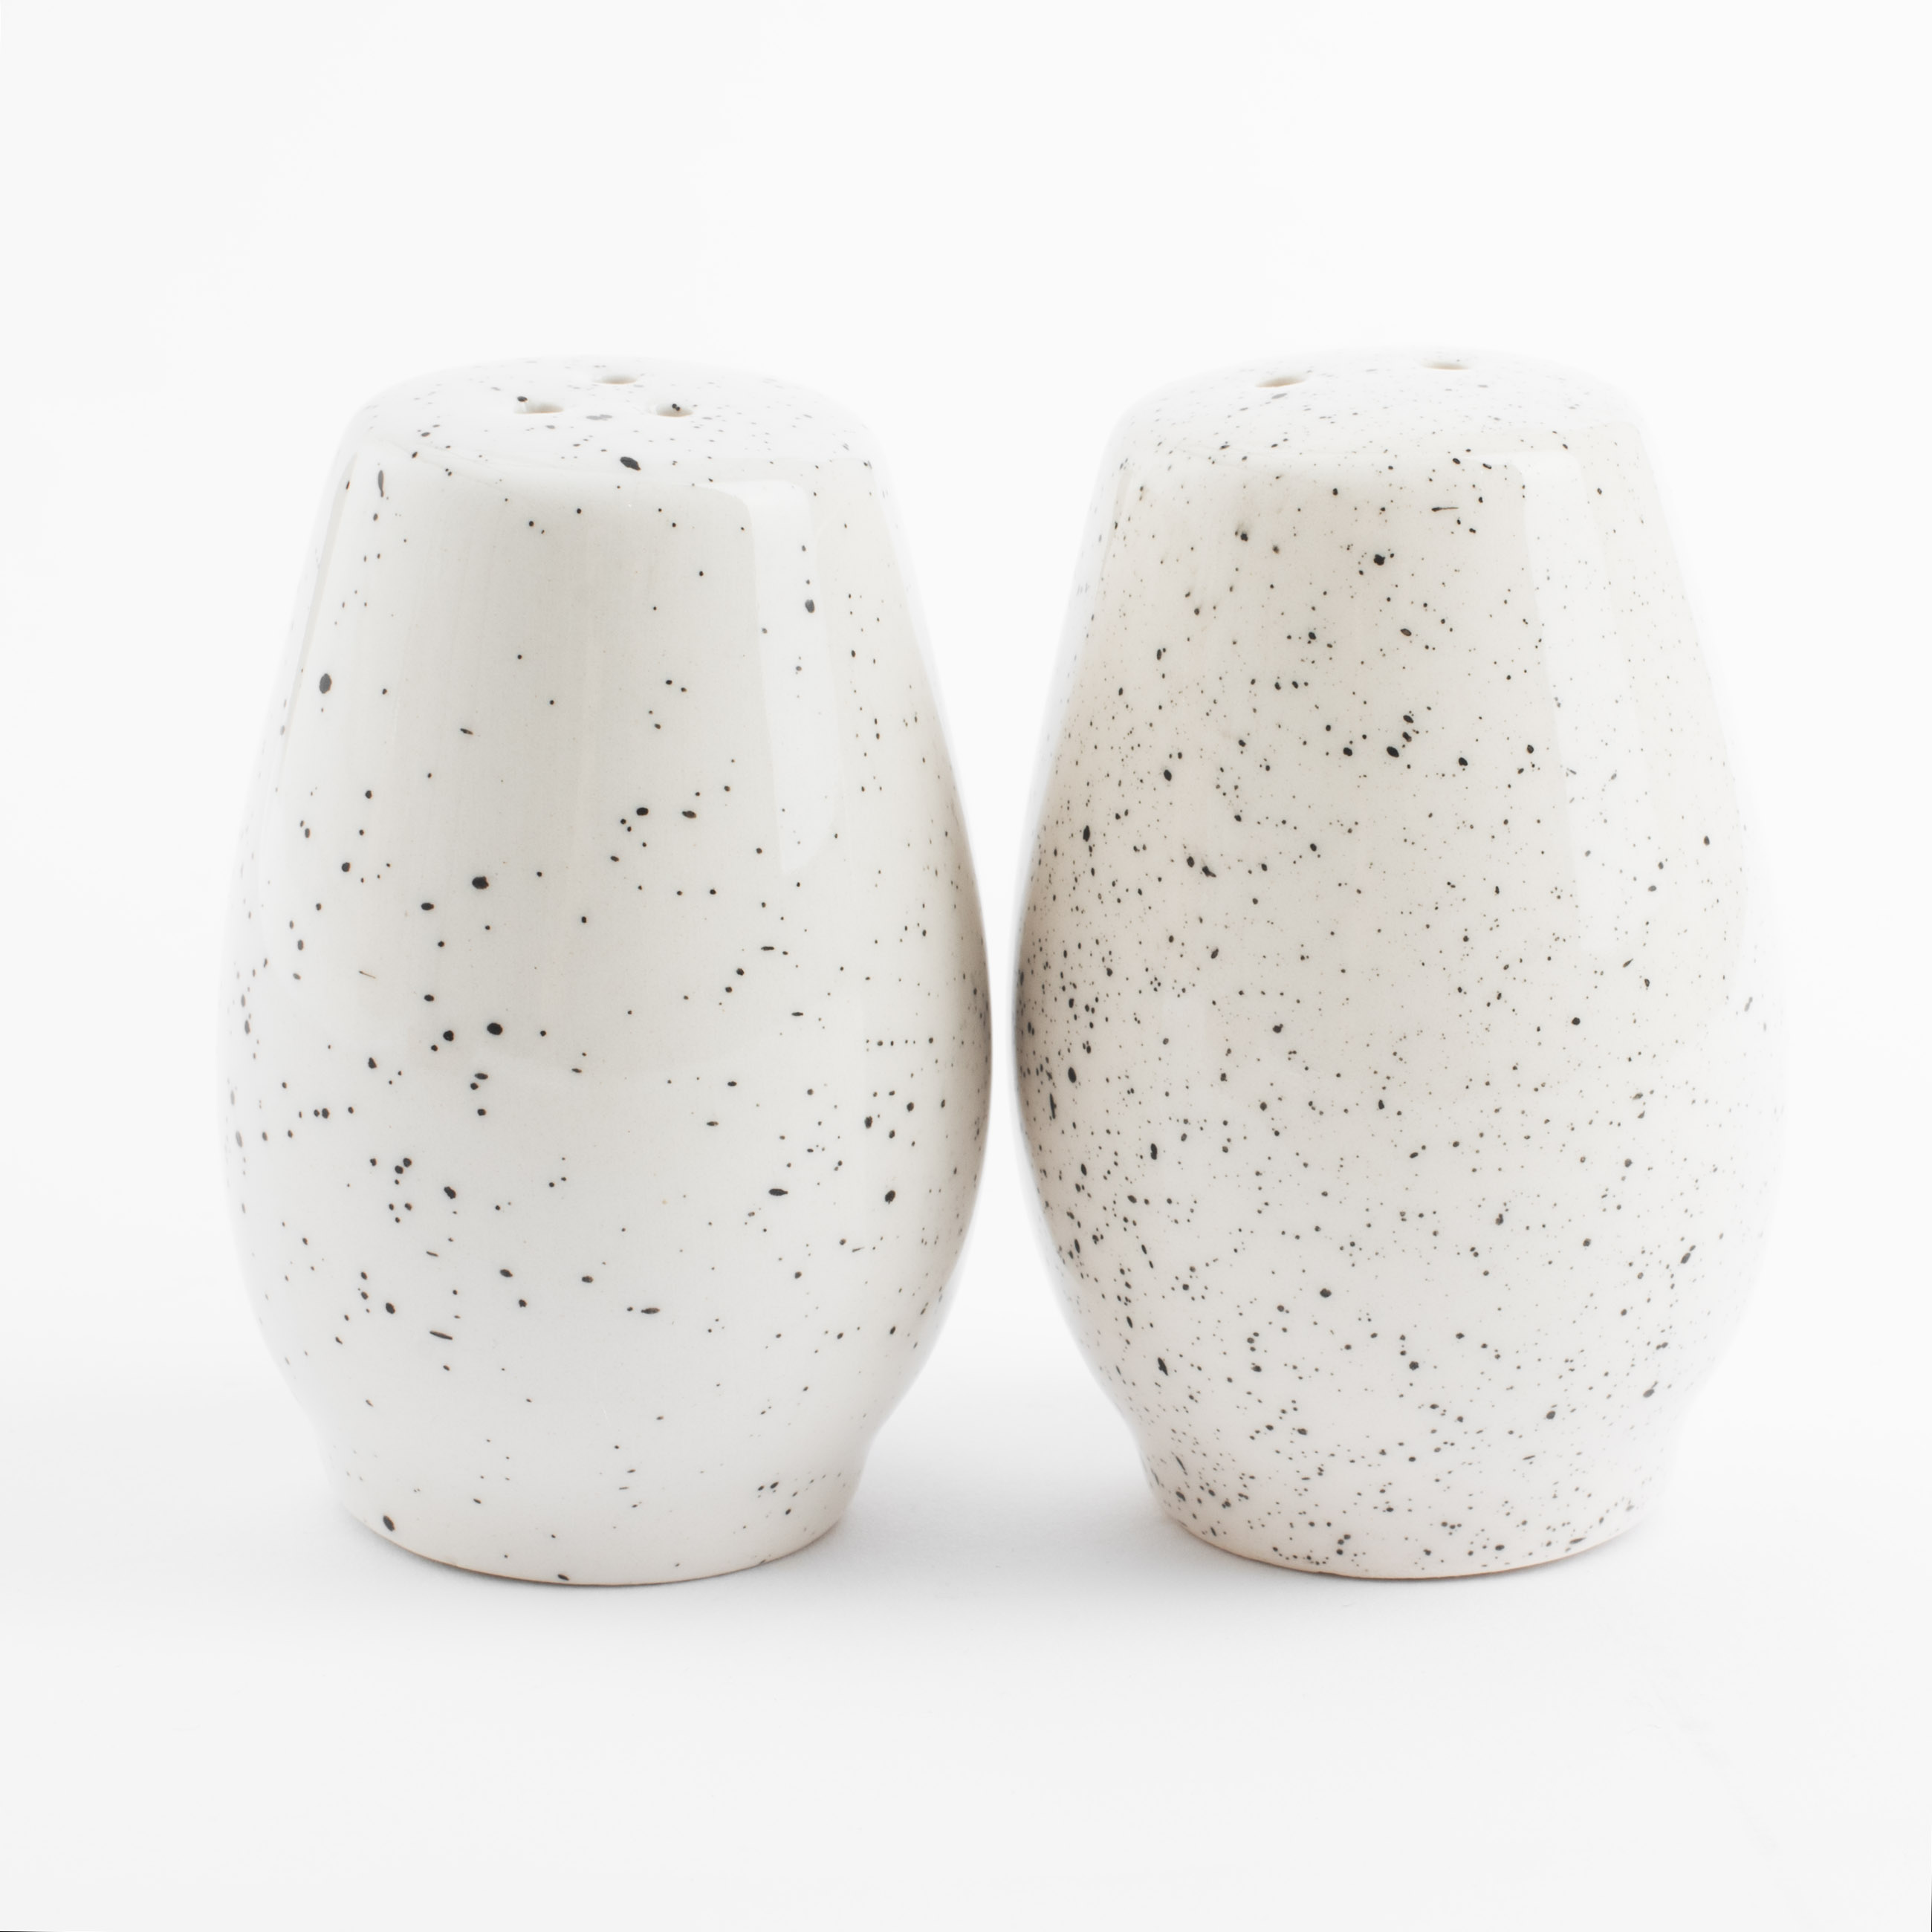 Salt and pepper set, 7 cm, ceramic, milky, speckled, Wildflowers, Meadow speckled изображение № 4